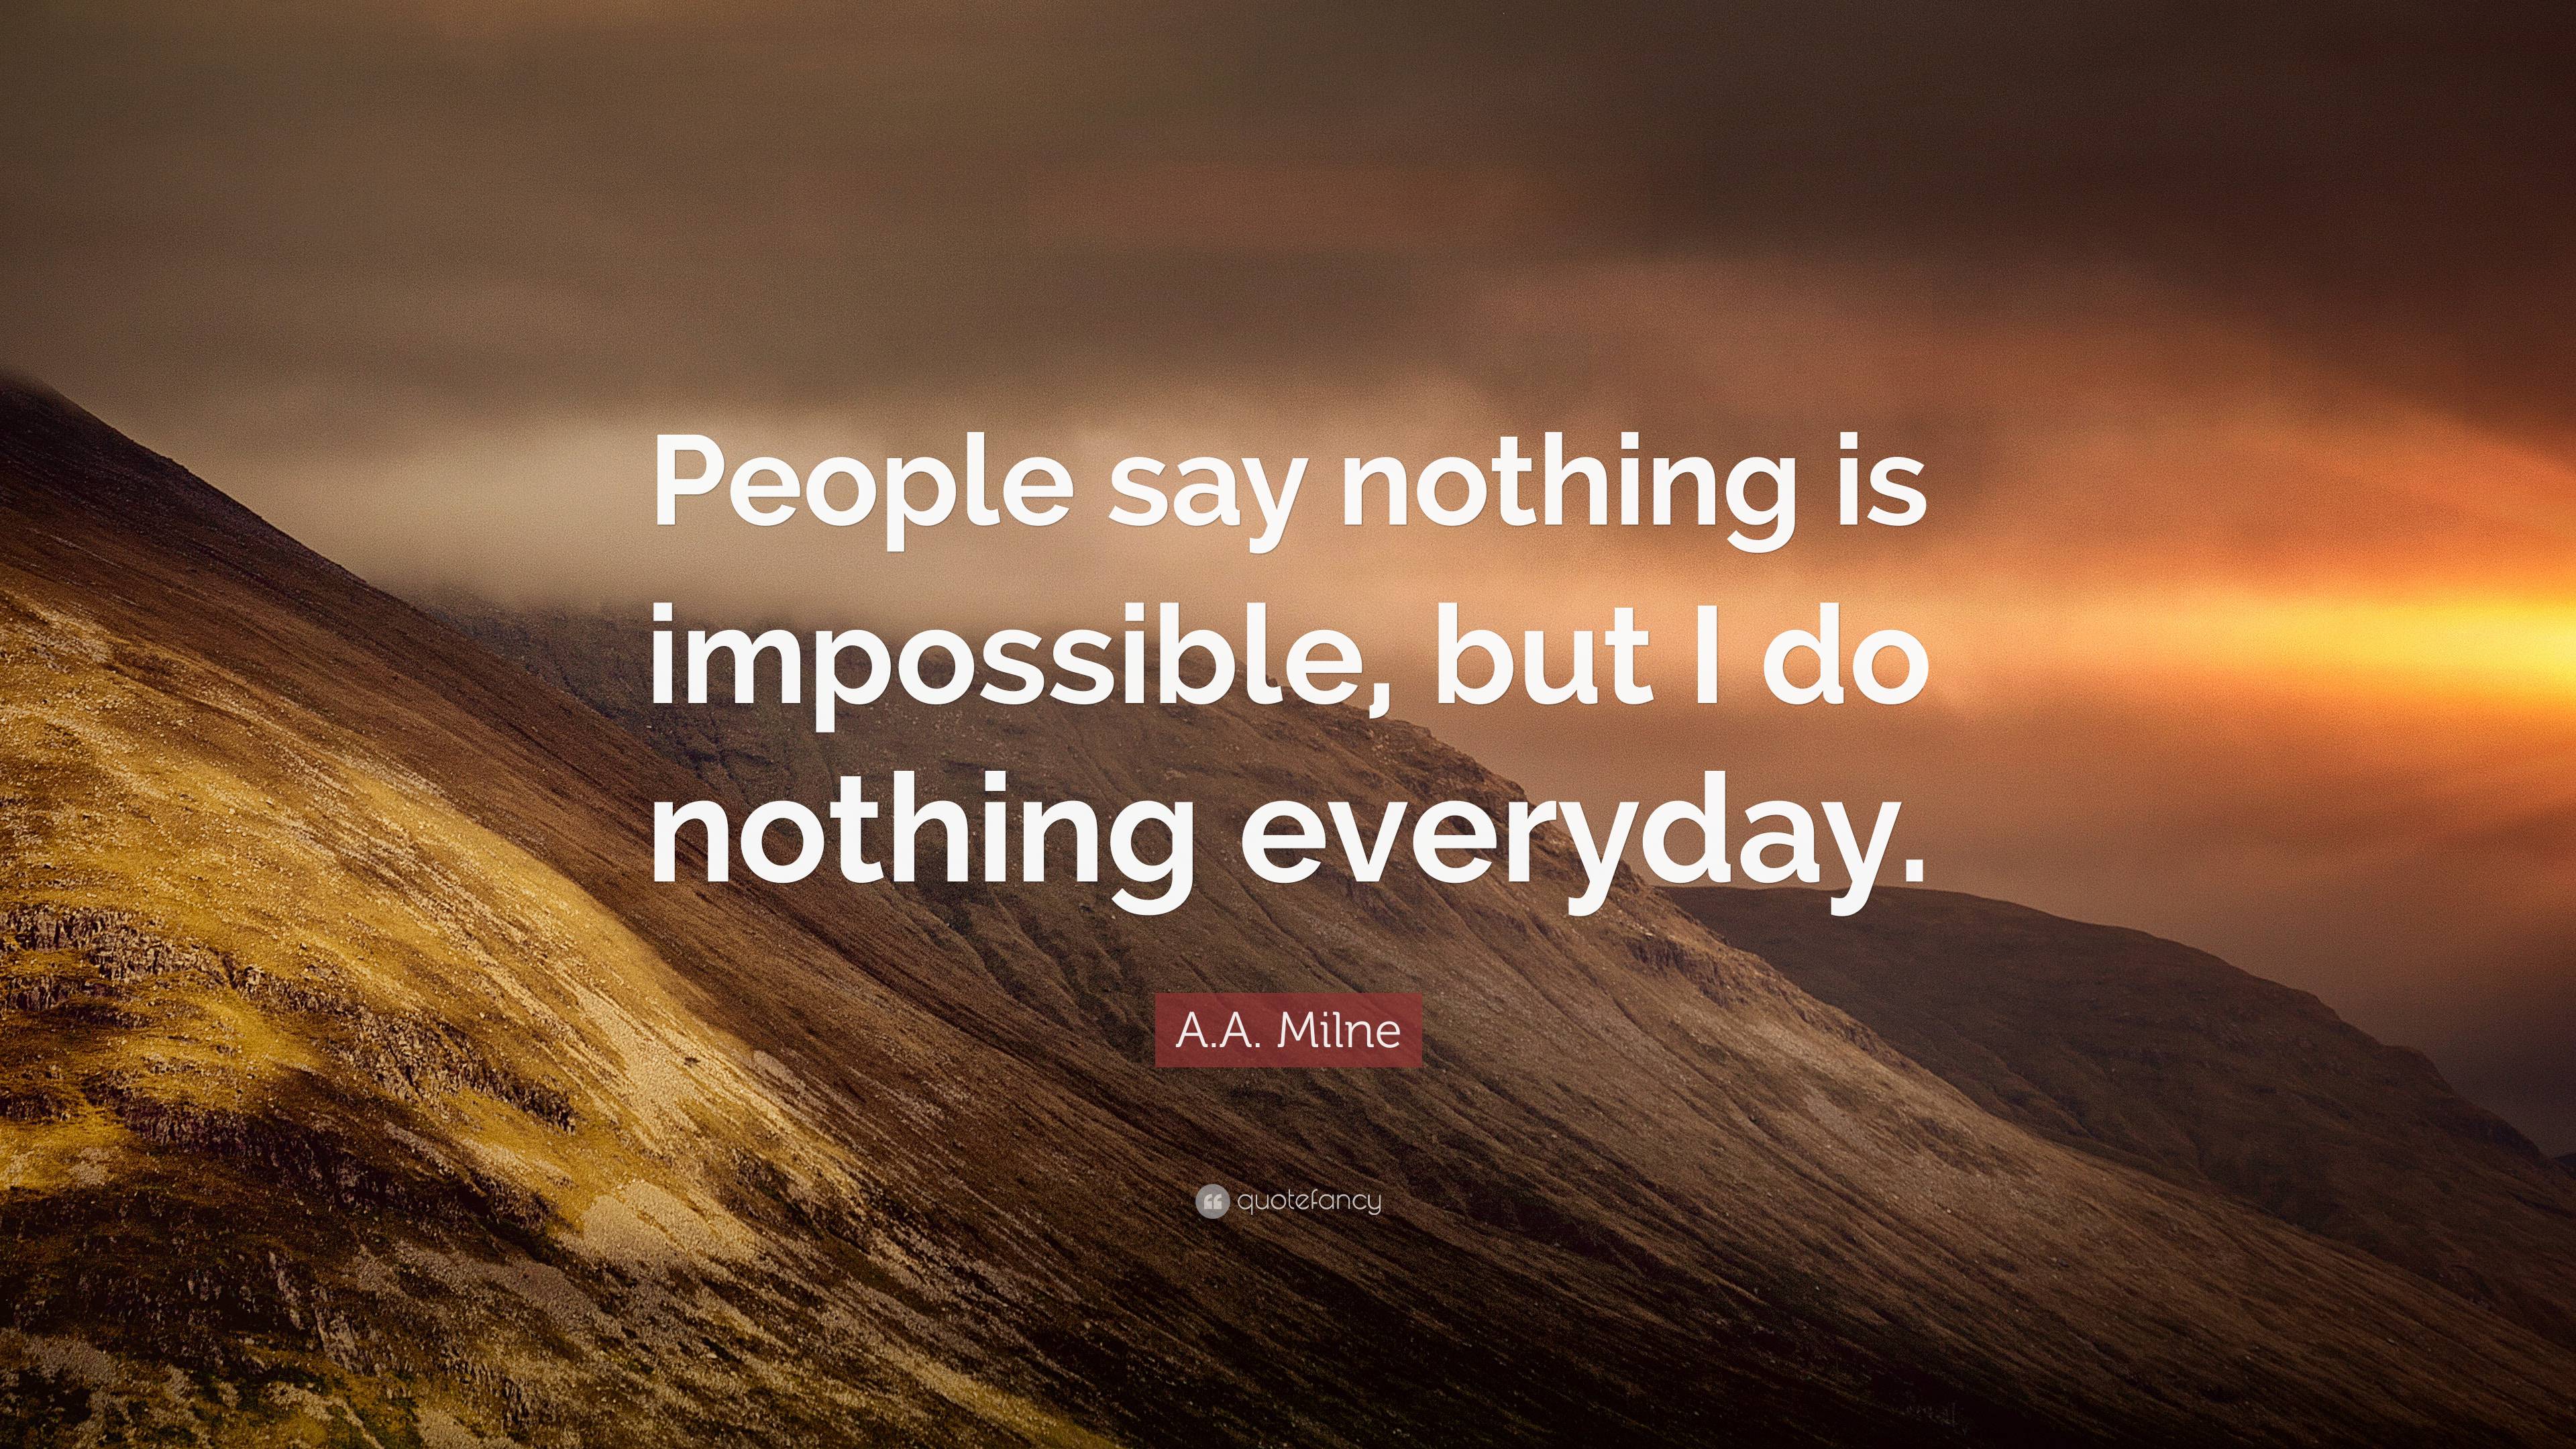 A.A. Milne Quote: “People say nothing is impossible, but I do nothing ...